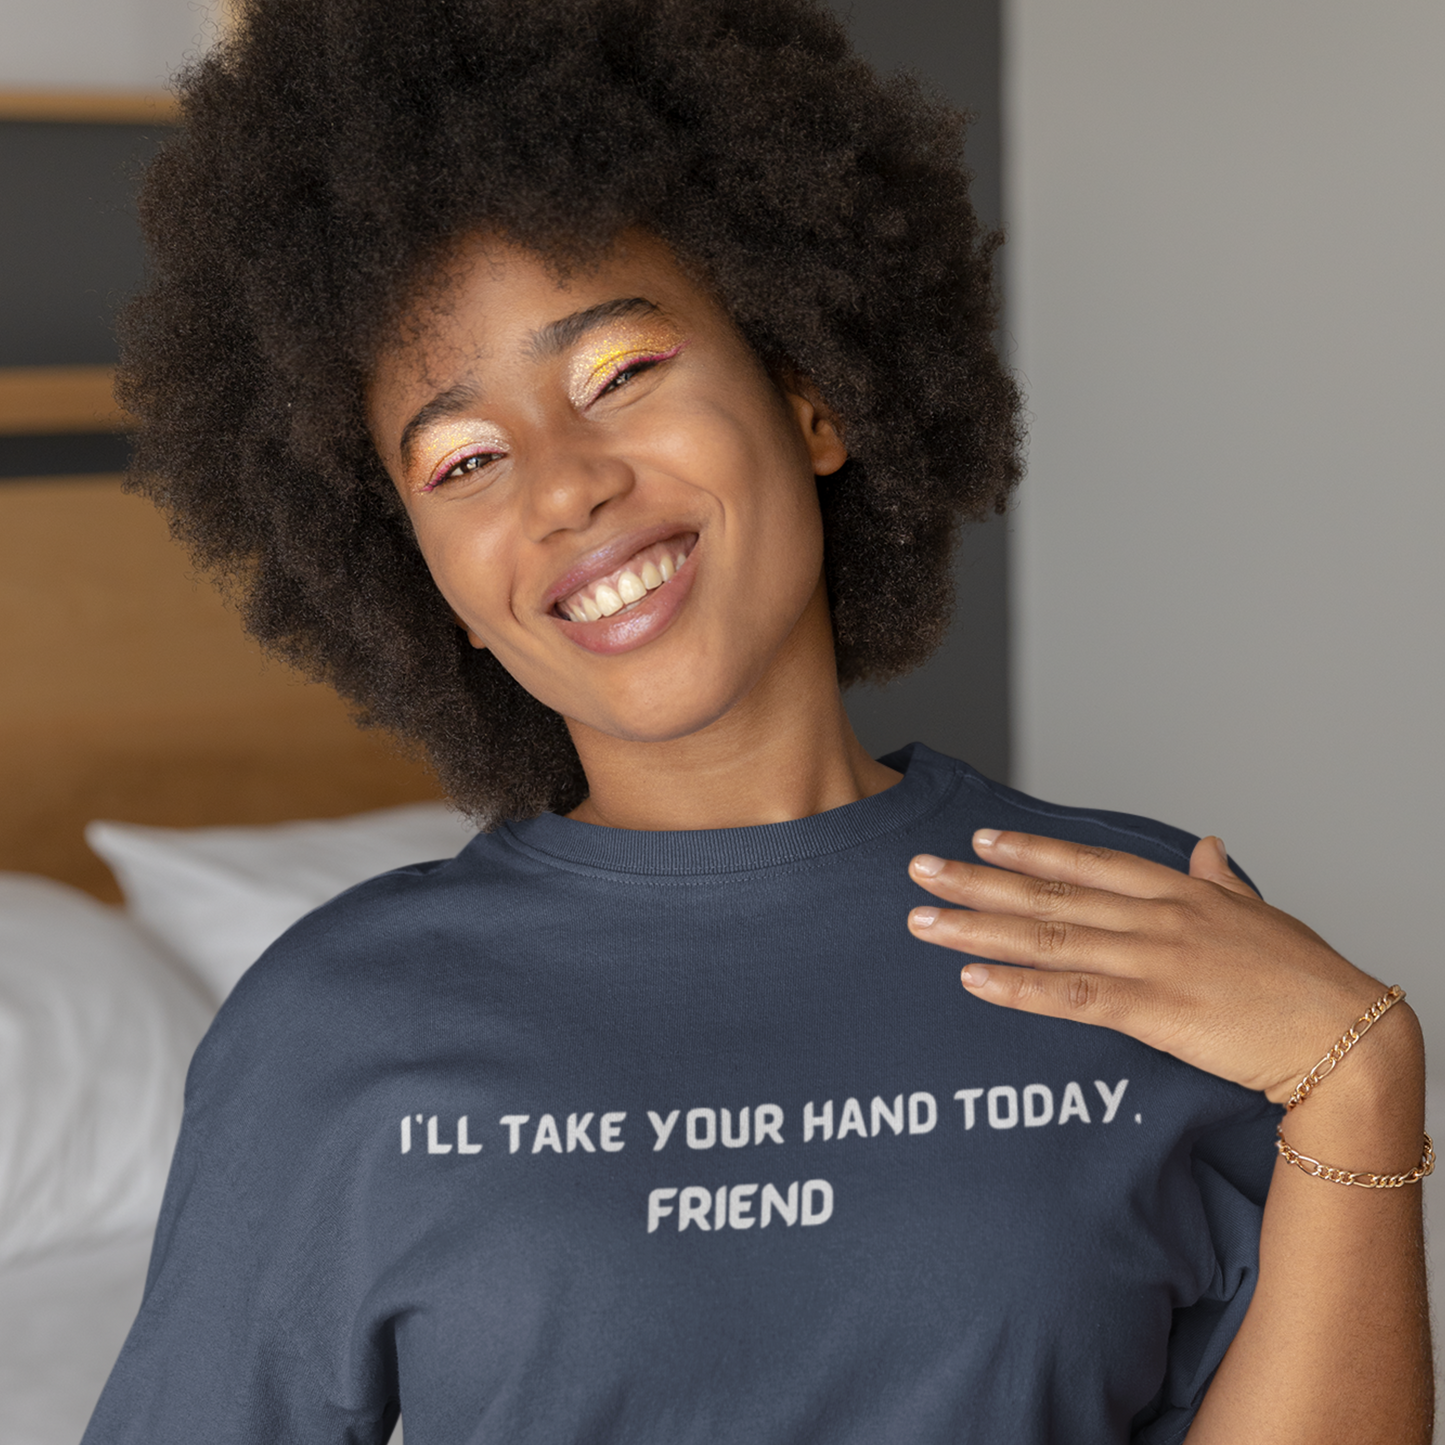 I'll take your hand today, friend unisex inspirational words tee shirt